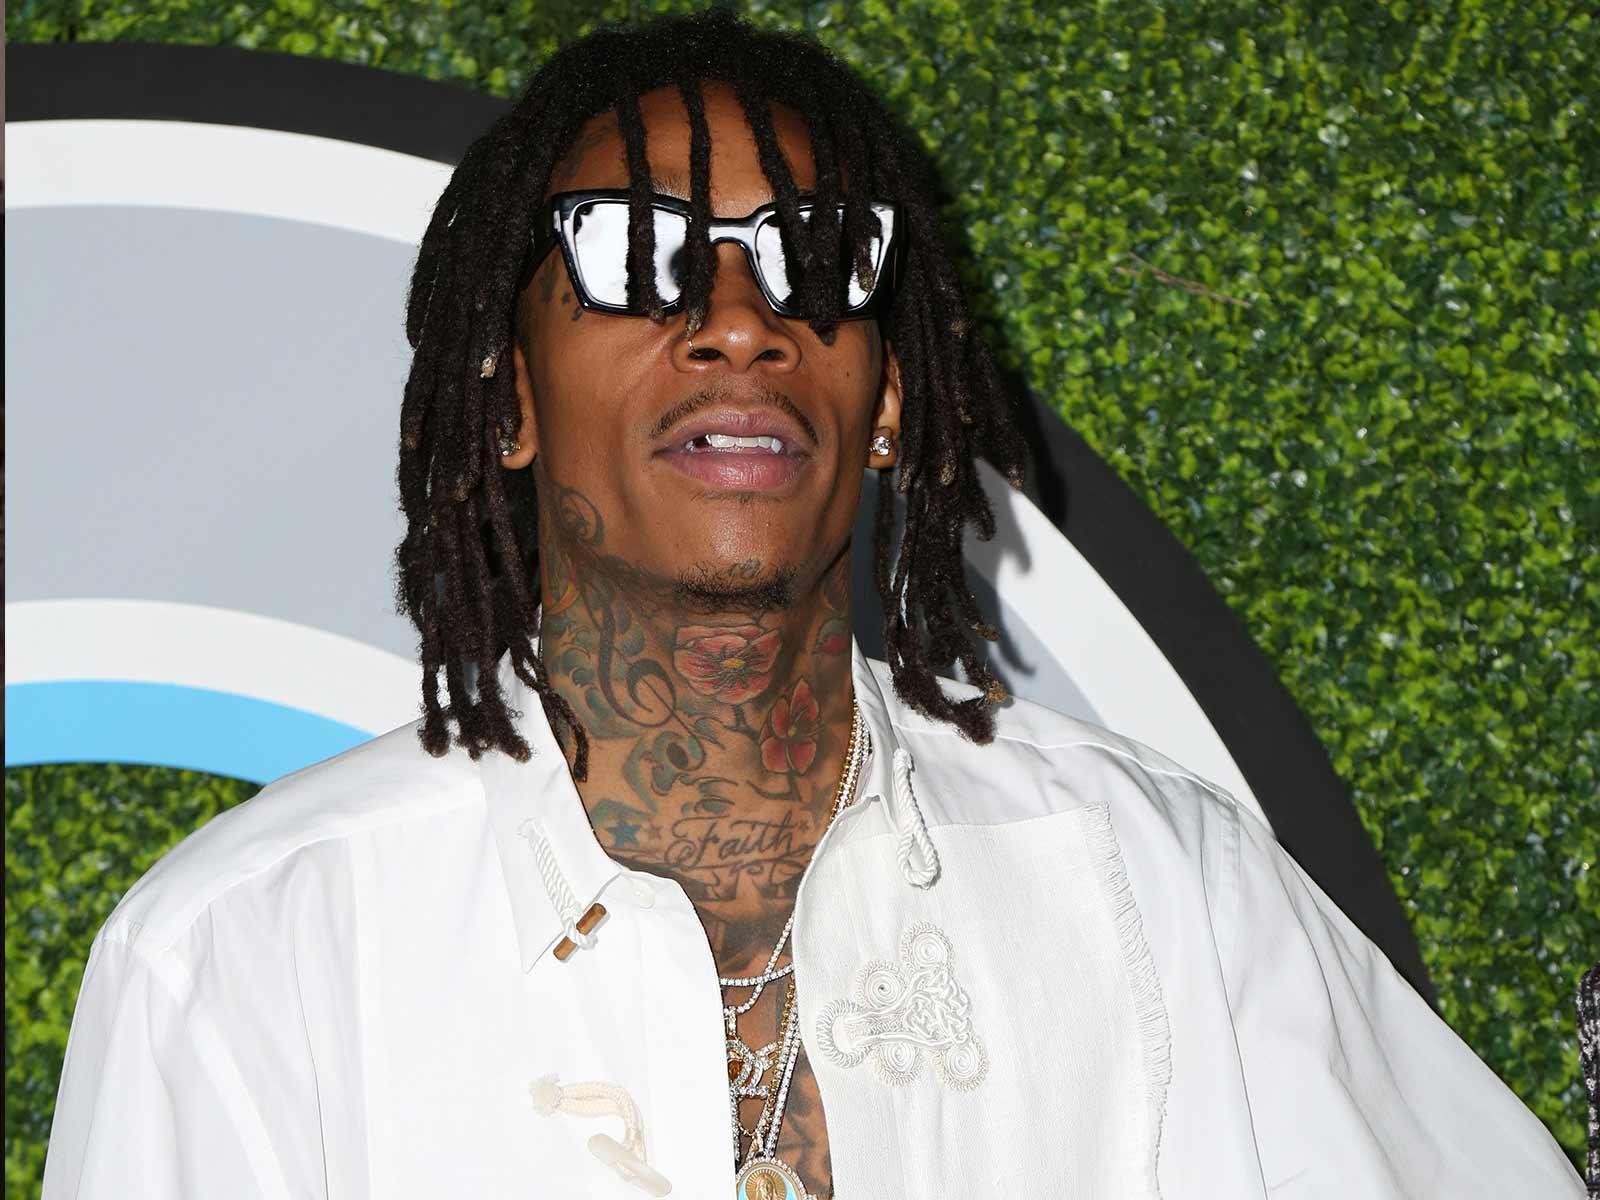 Rapper Sues Wiz Khalifa Claiming ‘Most of Us’ Is Entirely His